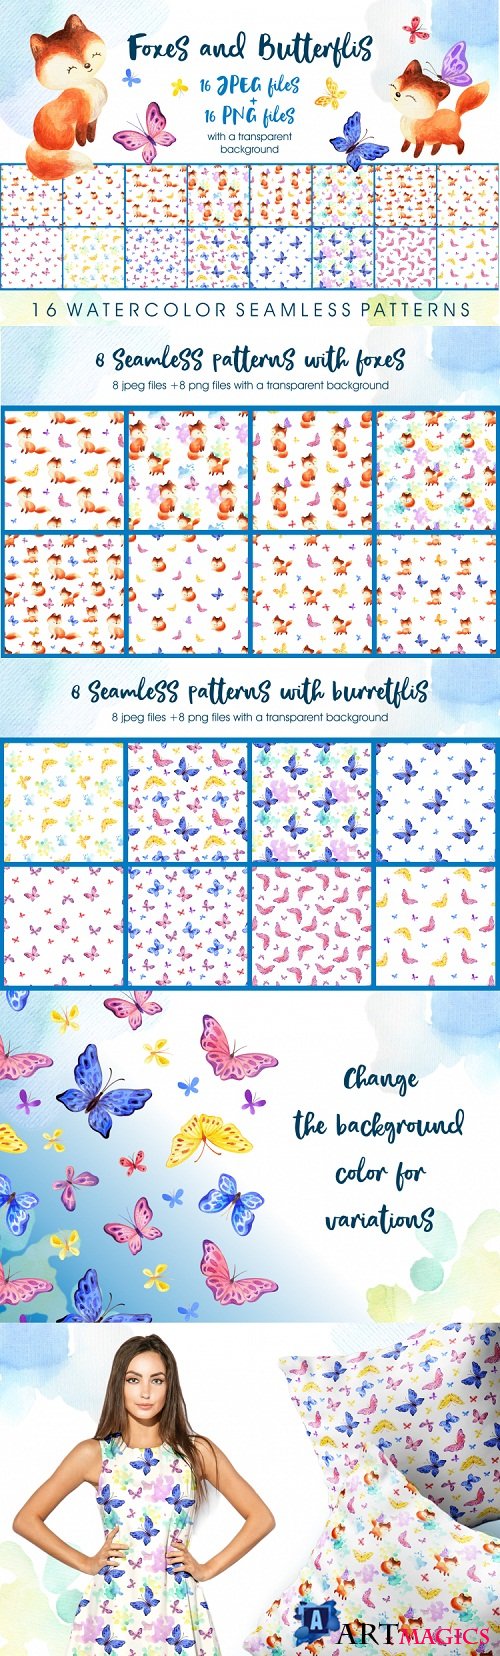 Foxes and butterflis. Watercolor seamless patterns - 259522